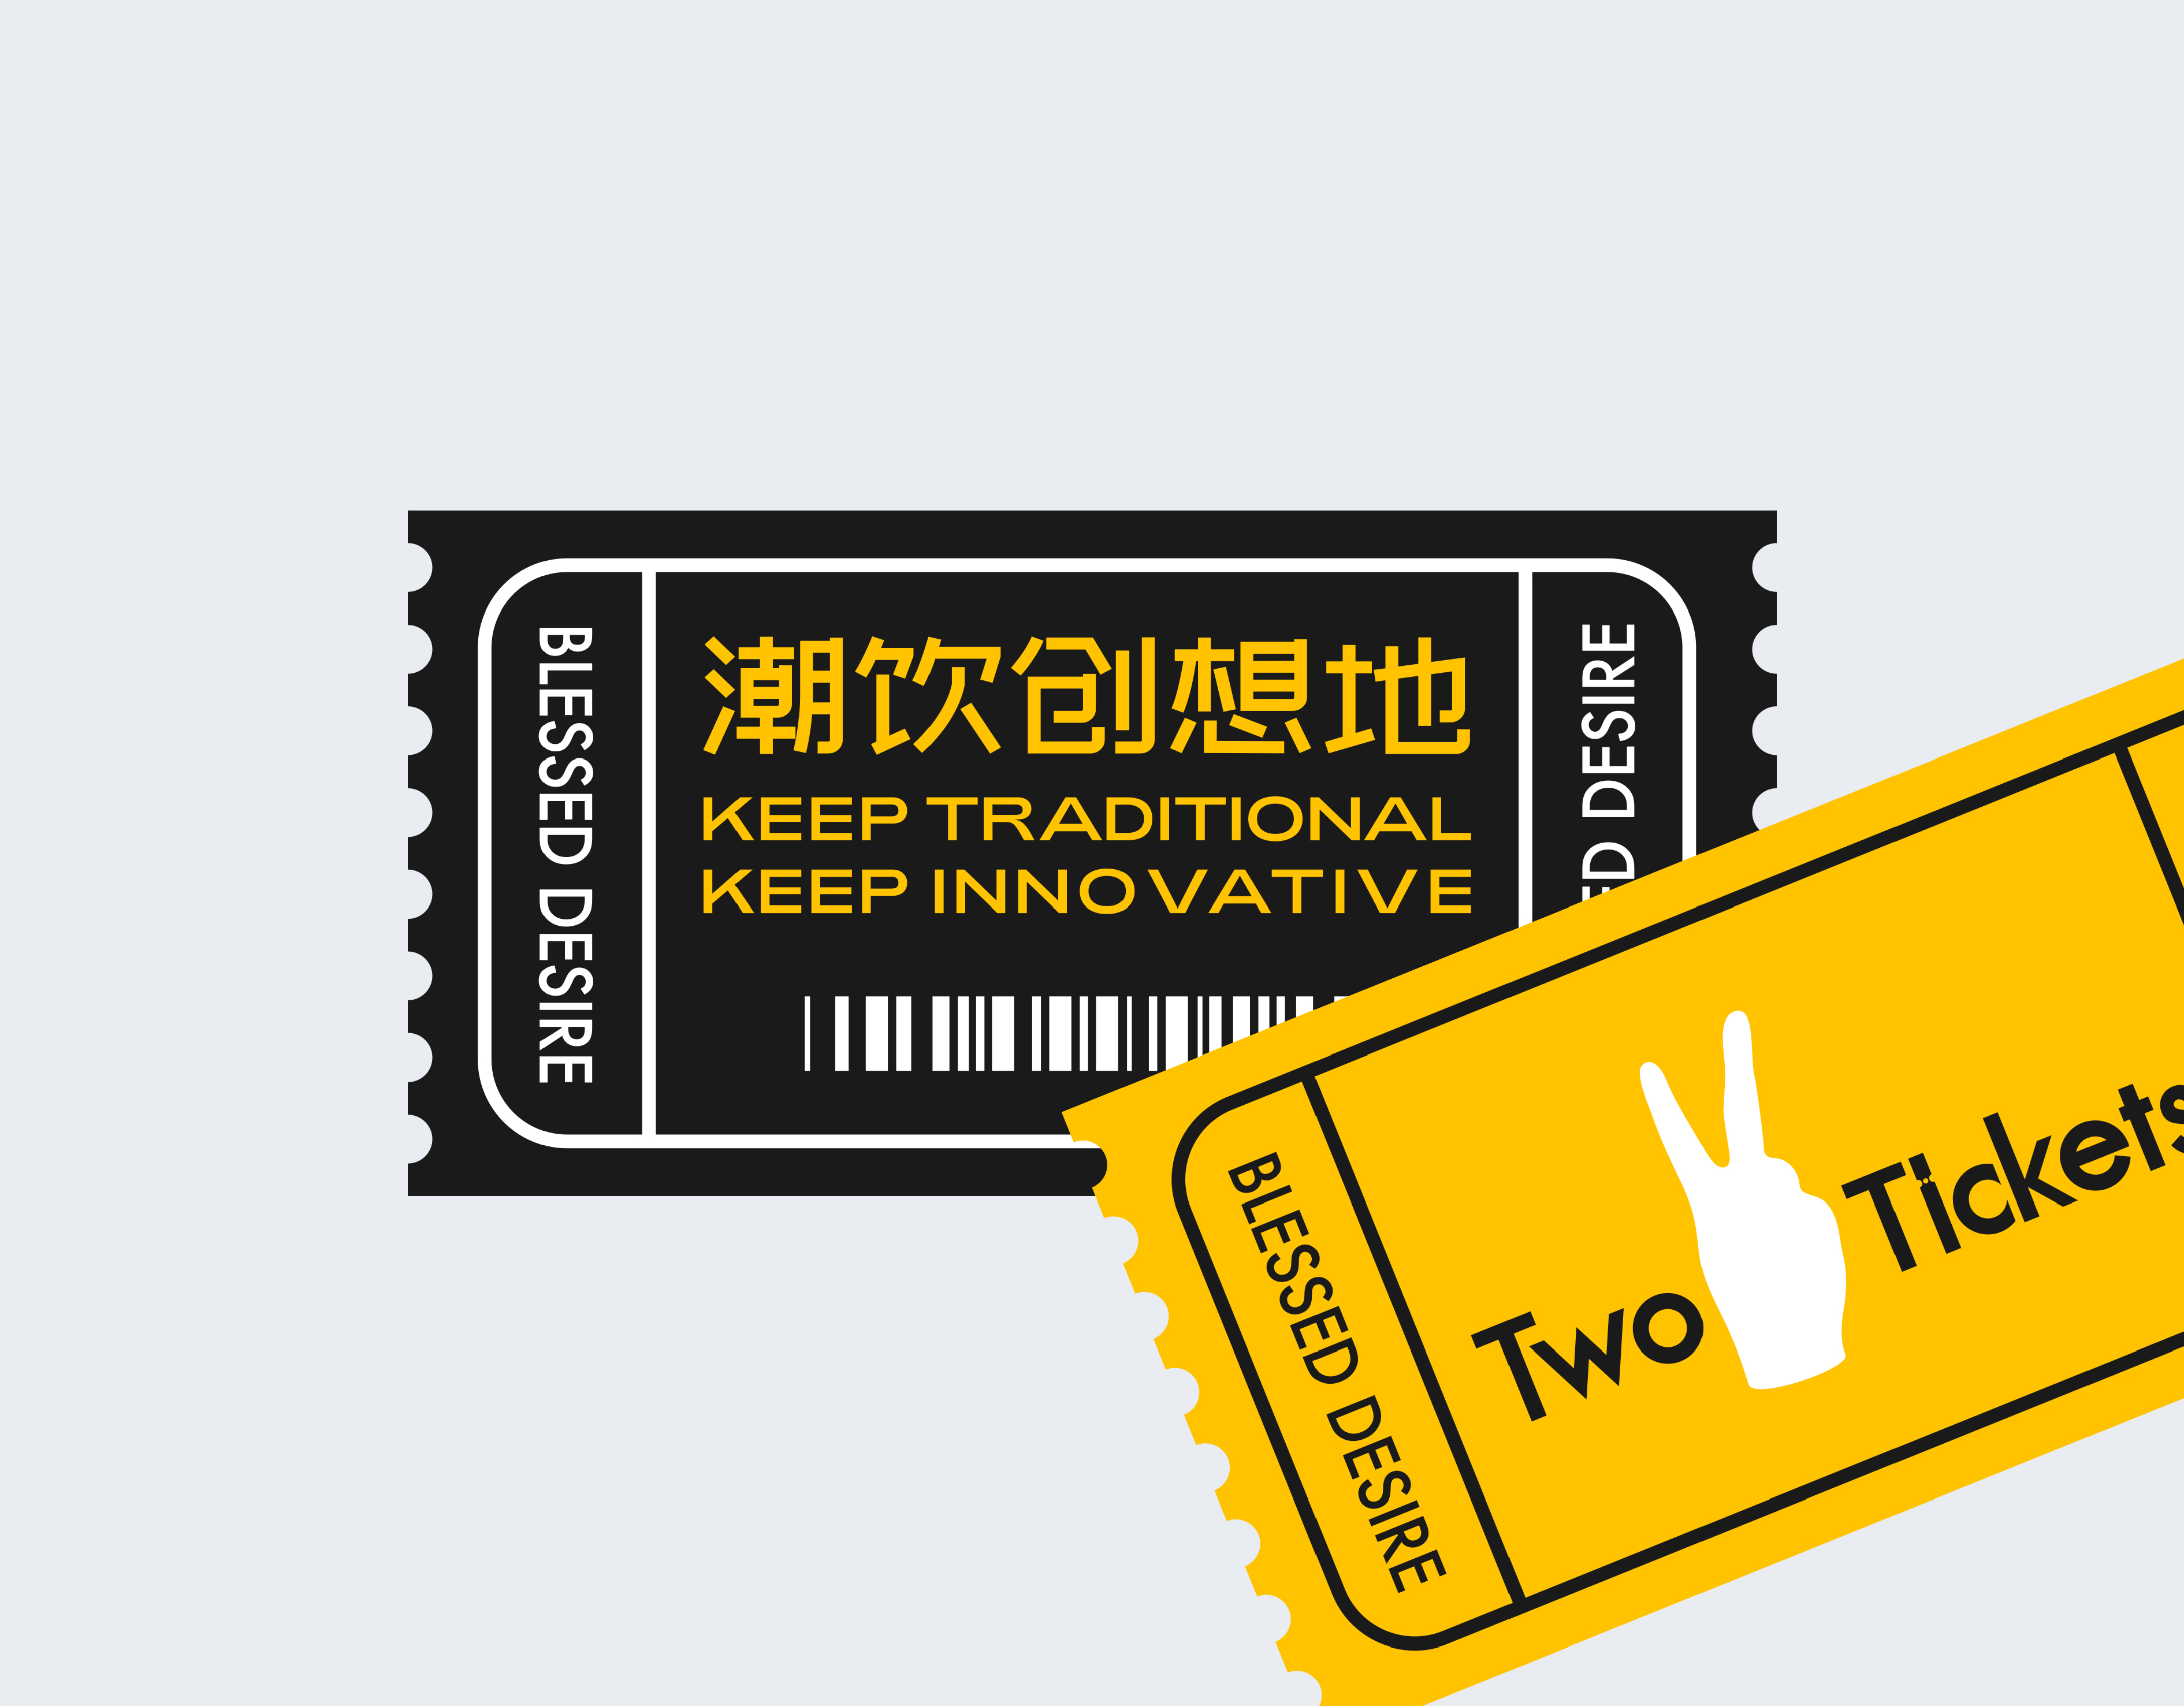 Two Tickets（锐伽联创）-08